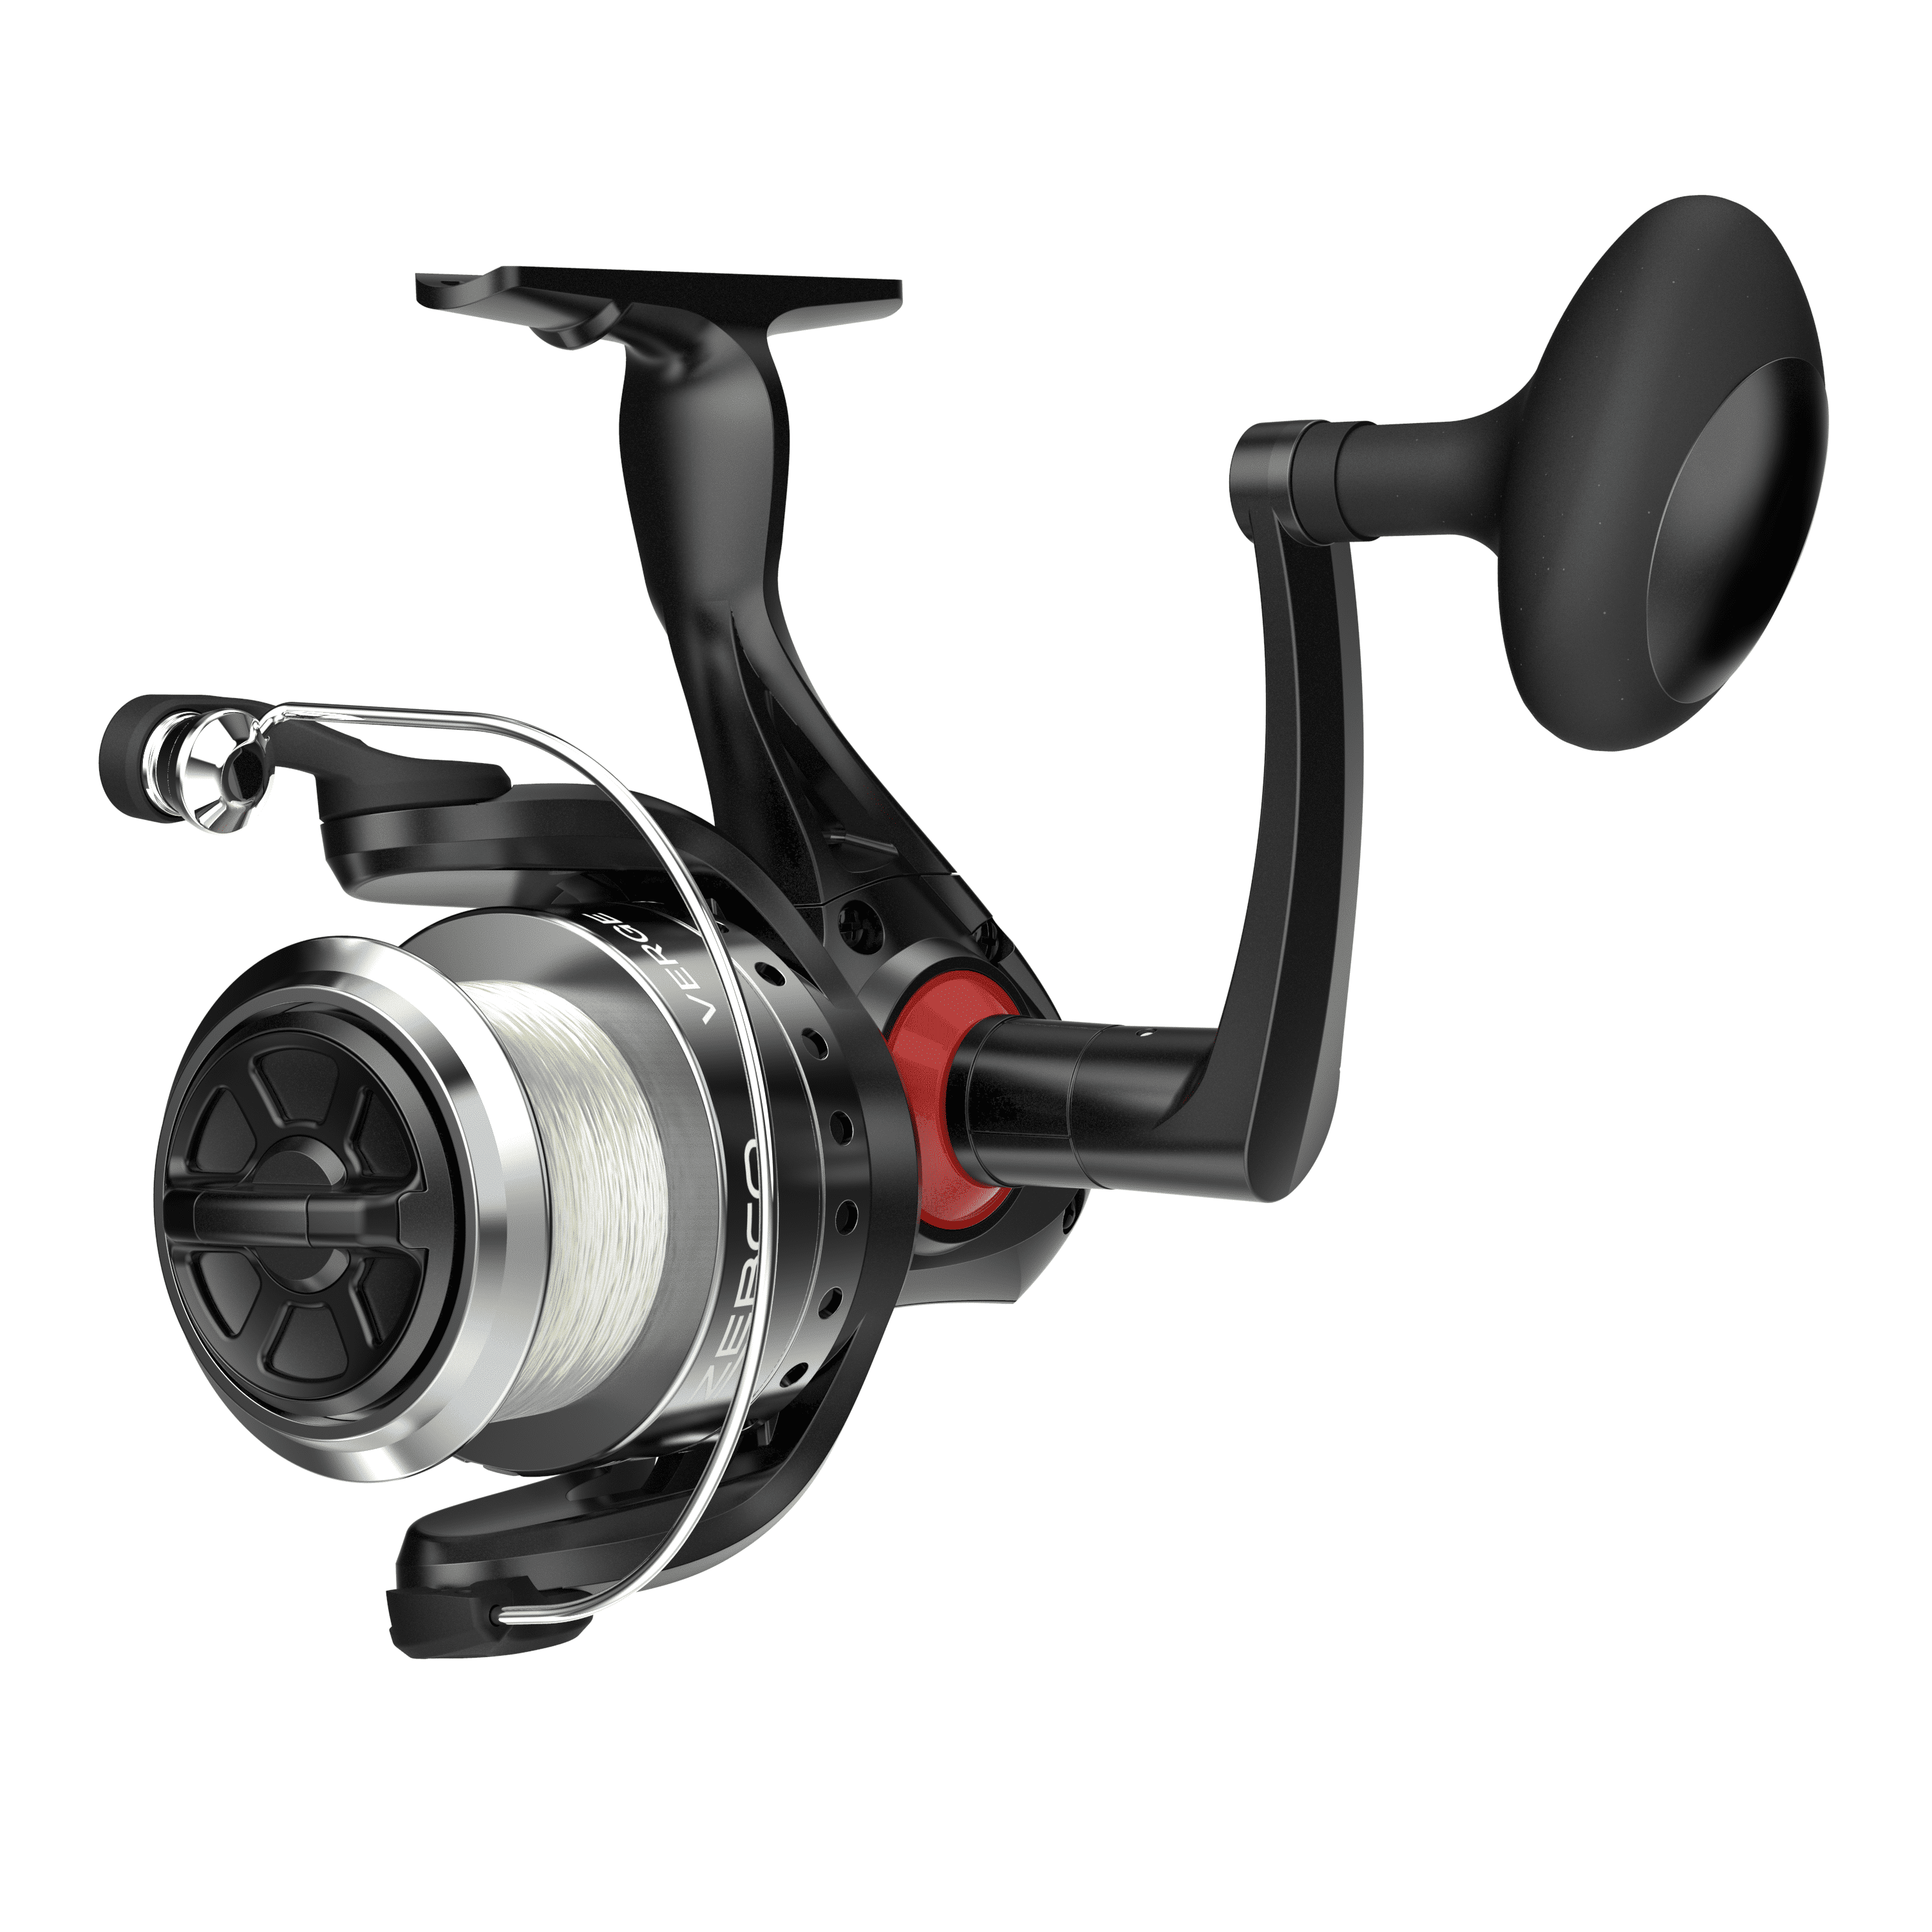 Zebco Verge Spinning Fishing Reel, Size 60 Reel, Changeable Right- or  Left-Hand Retrieve, Pre-Spooled with 20-Pound Zebco Fishing Line, All-Metal